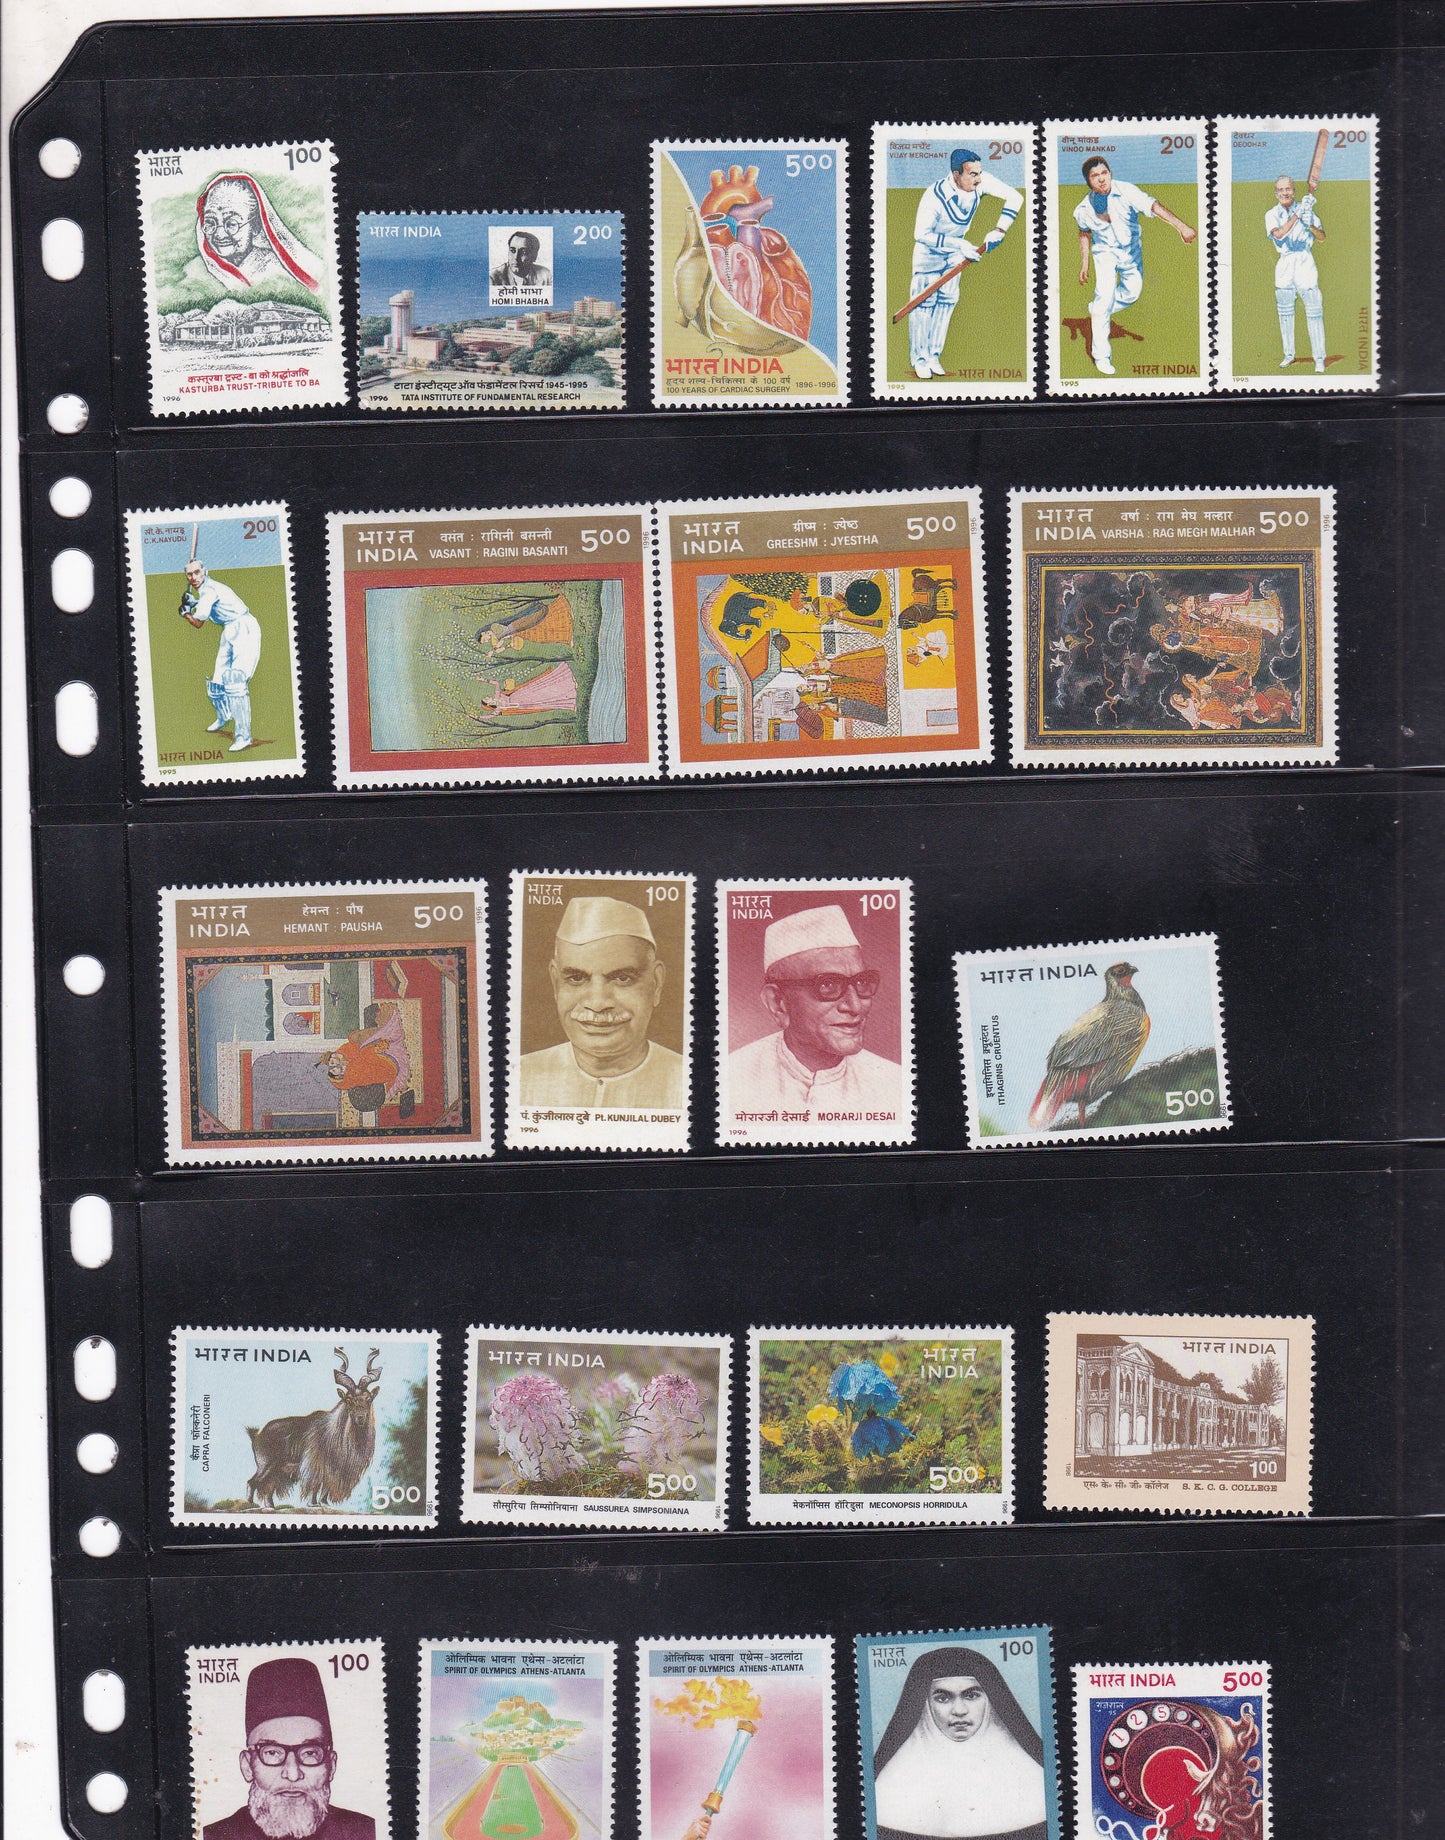 India-1996 Full Year pack MNH Stamps